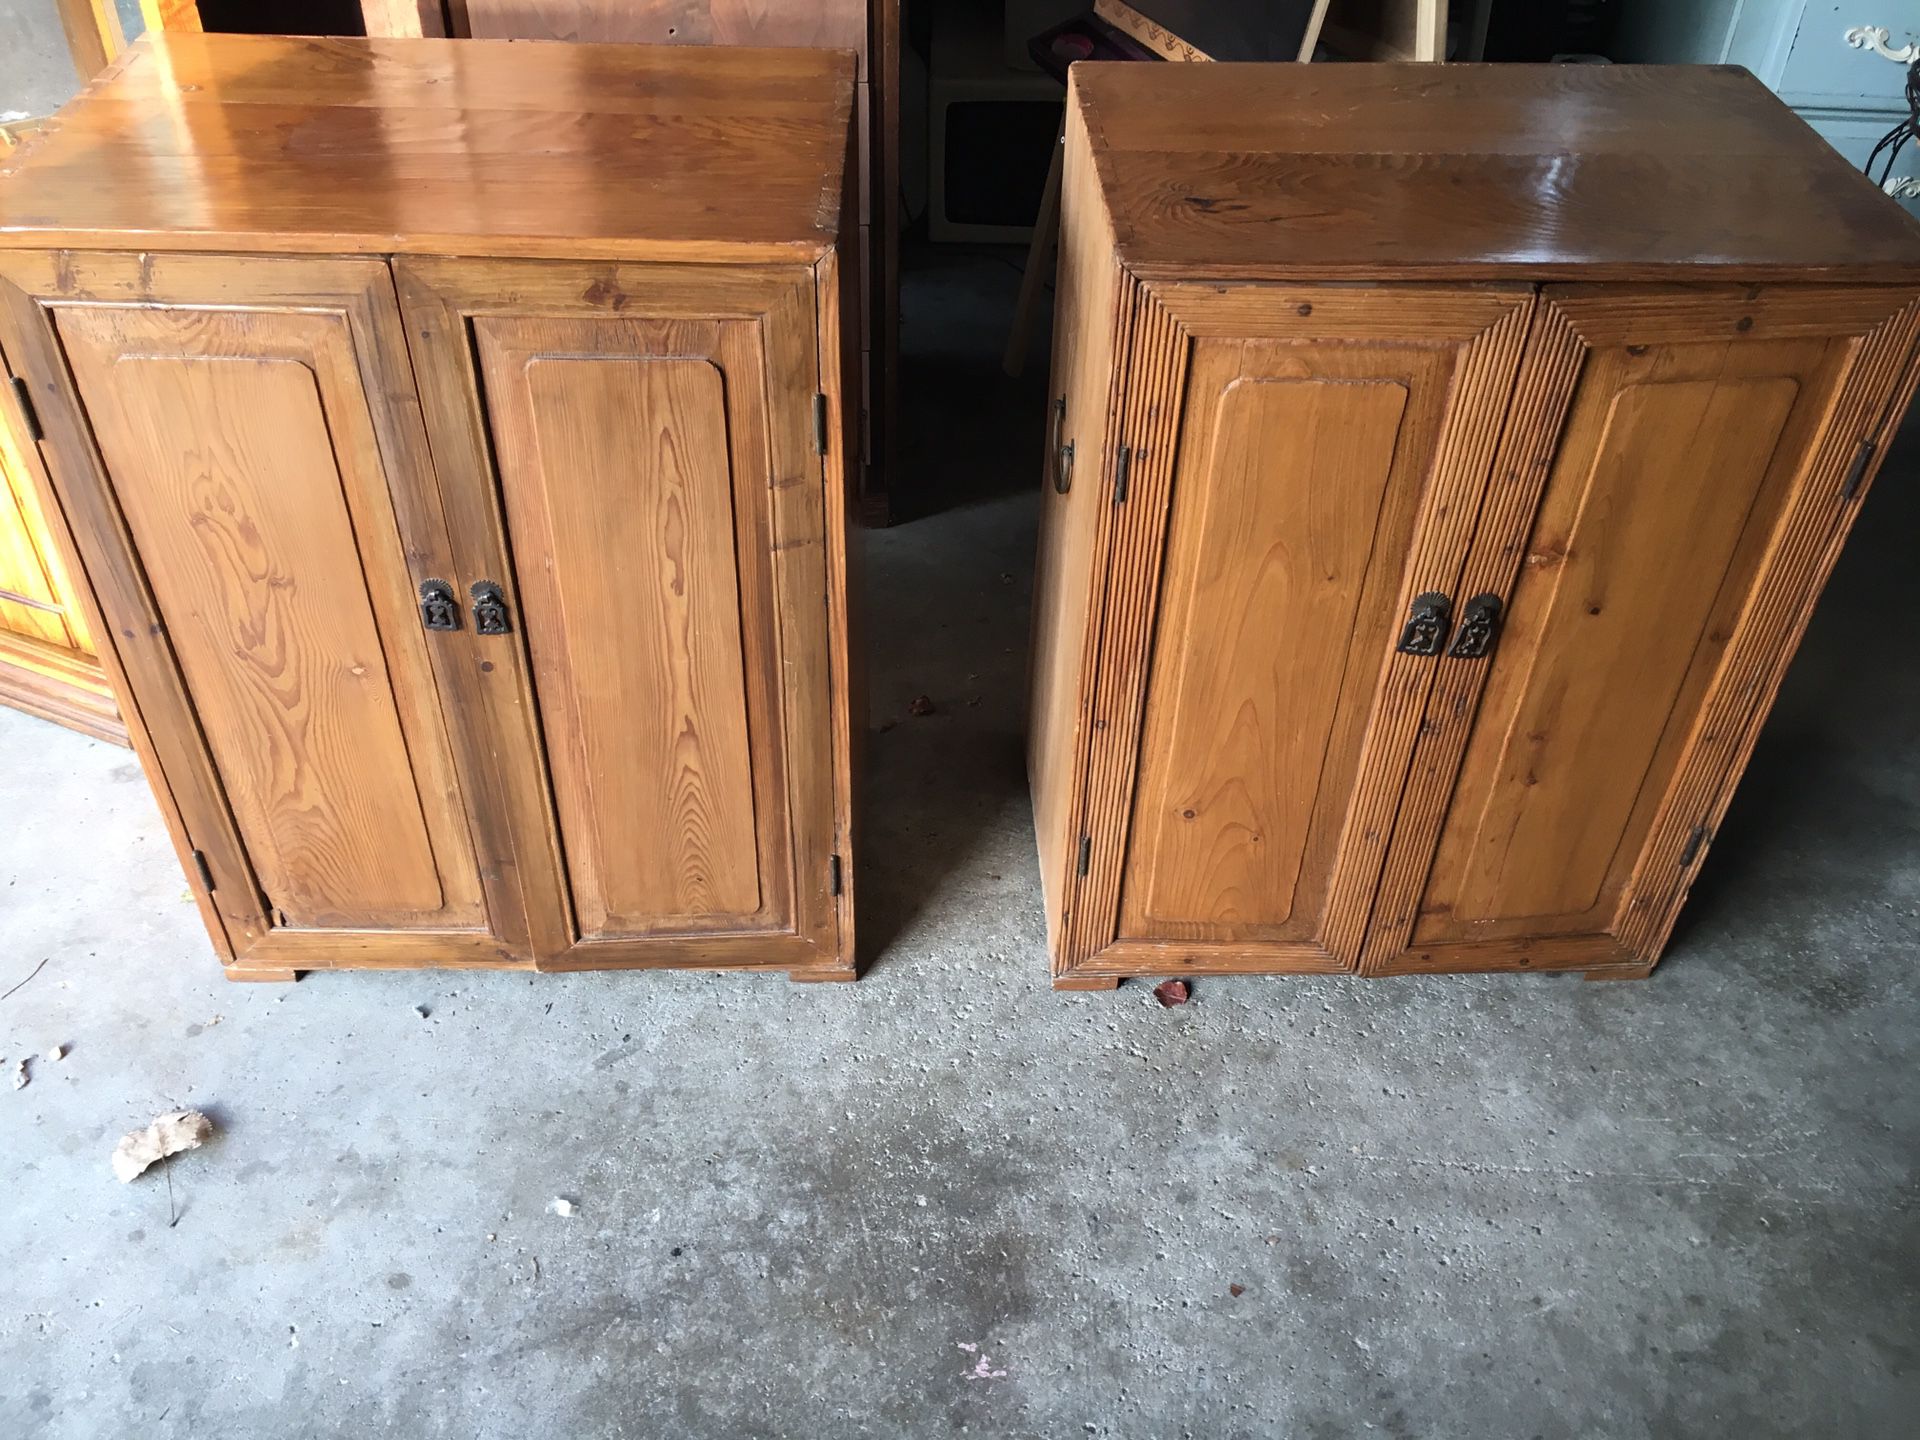 Late 1700-1800s Primitive Jelly Cabinets